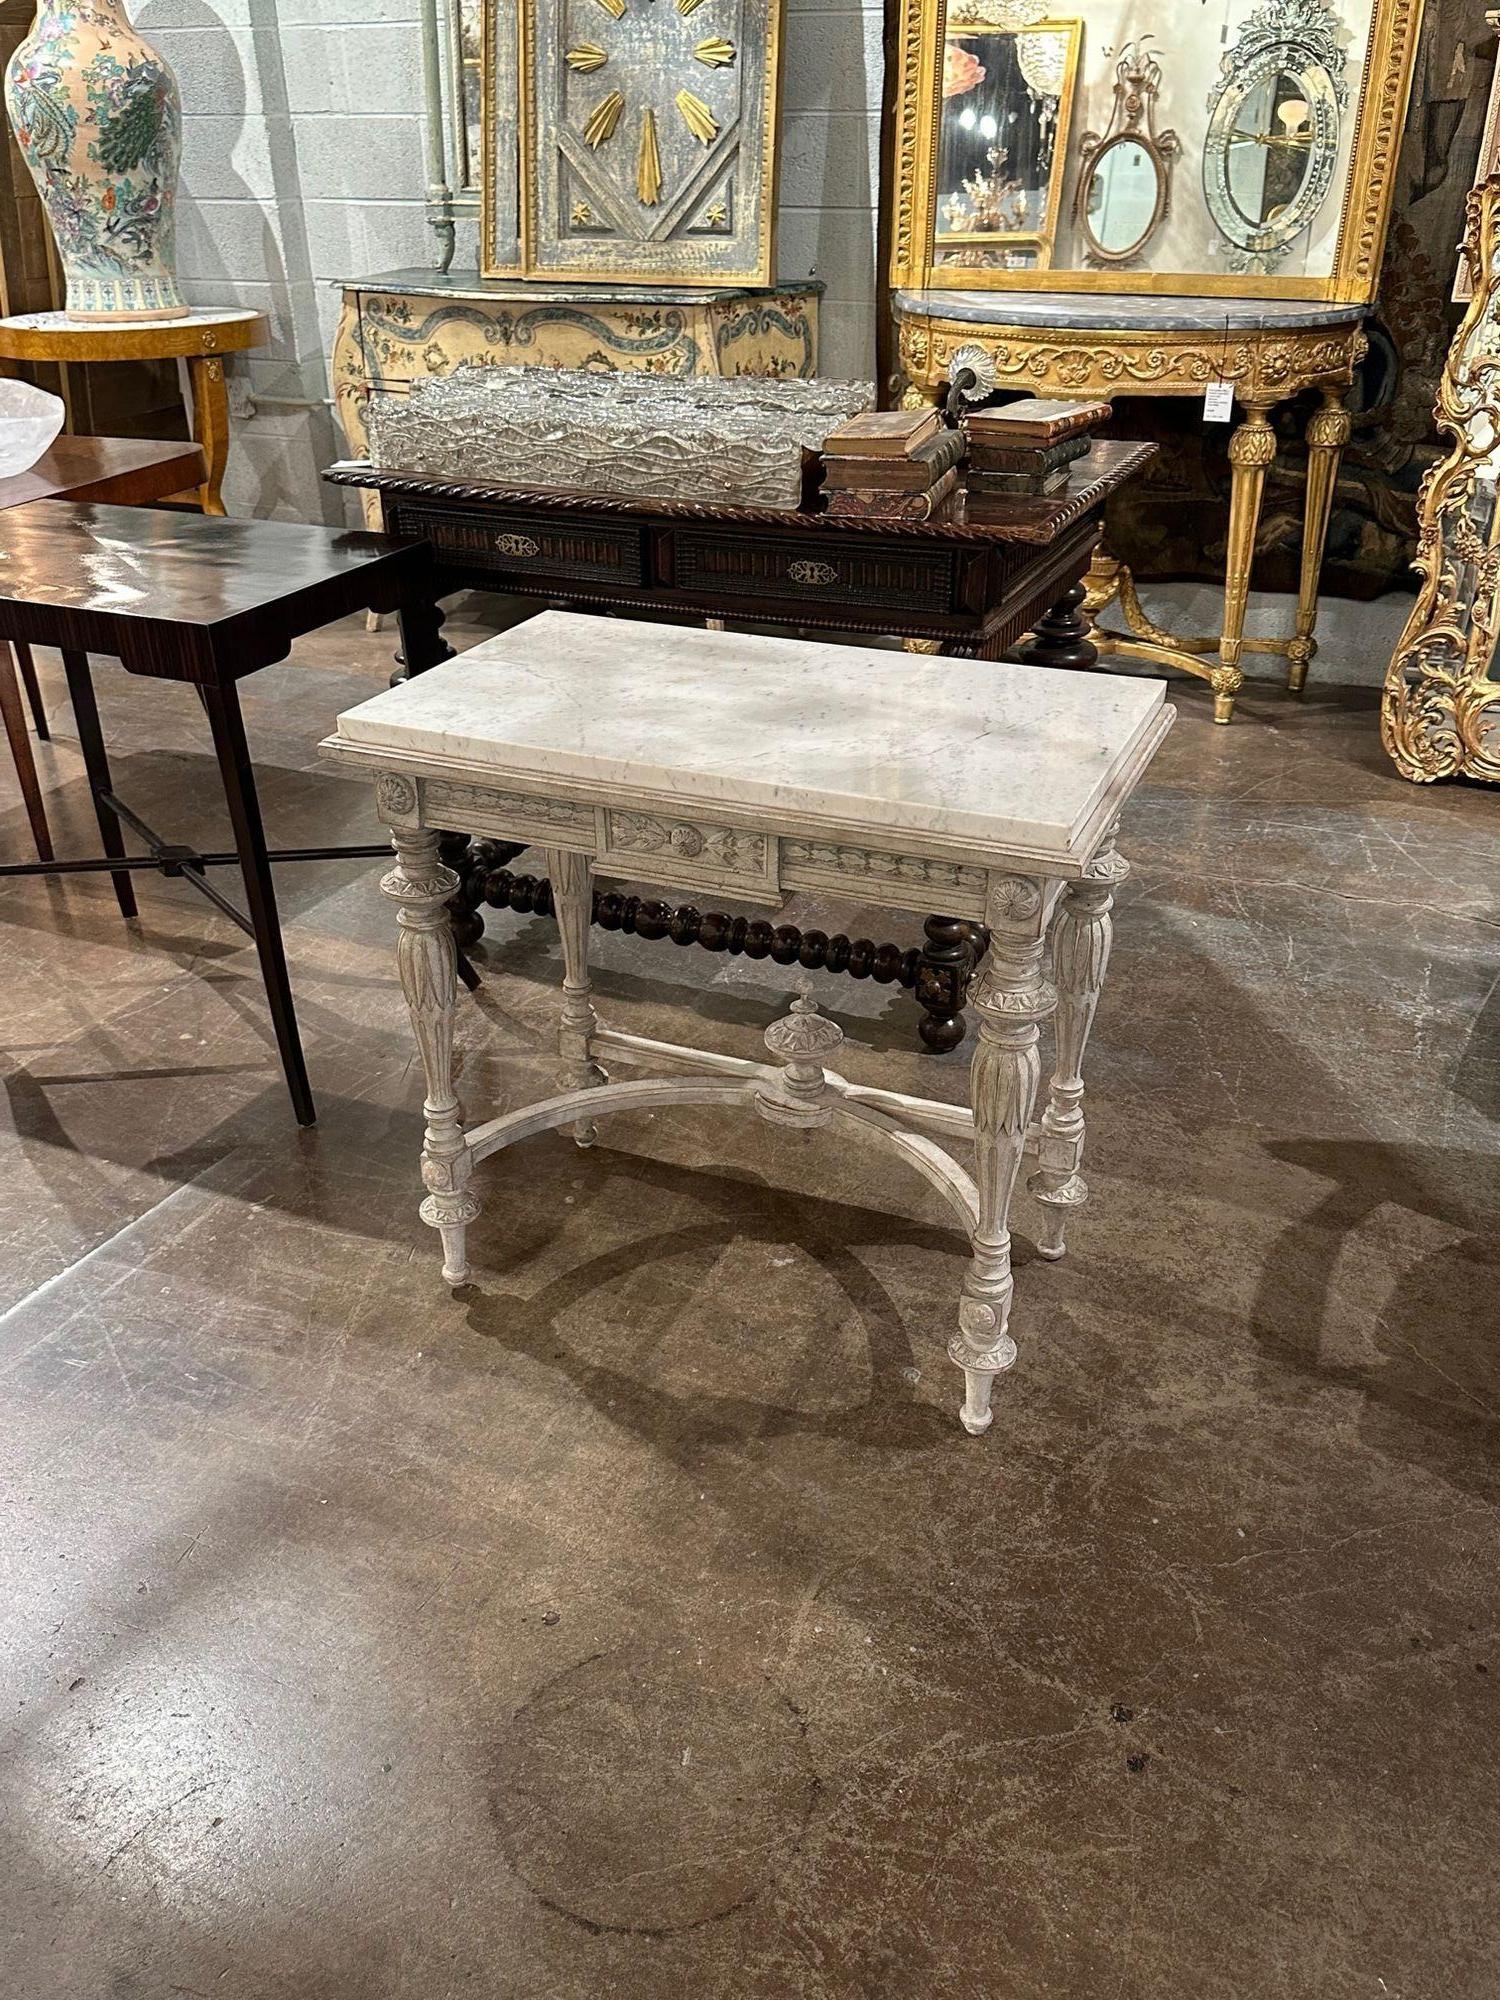 19th Century Swedish painted side table with marble top. circa 1880. A fine addition to any home!